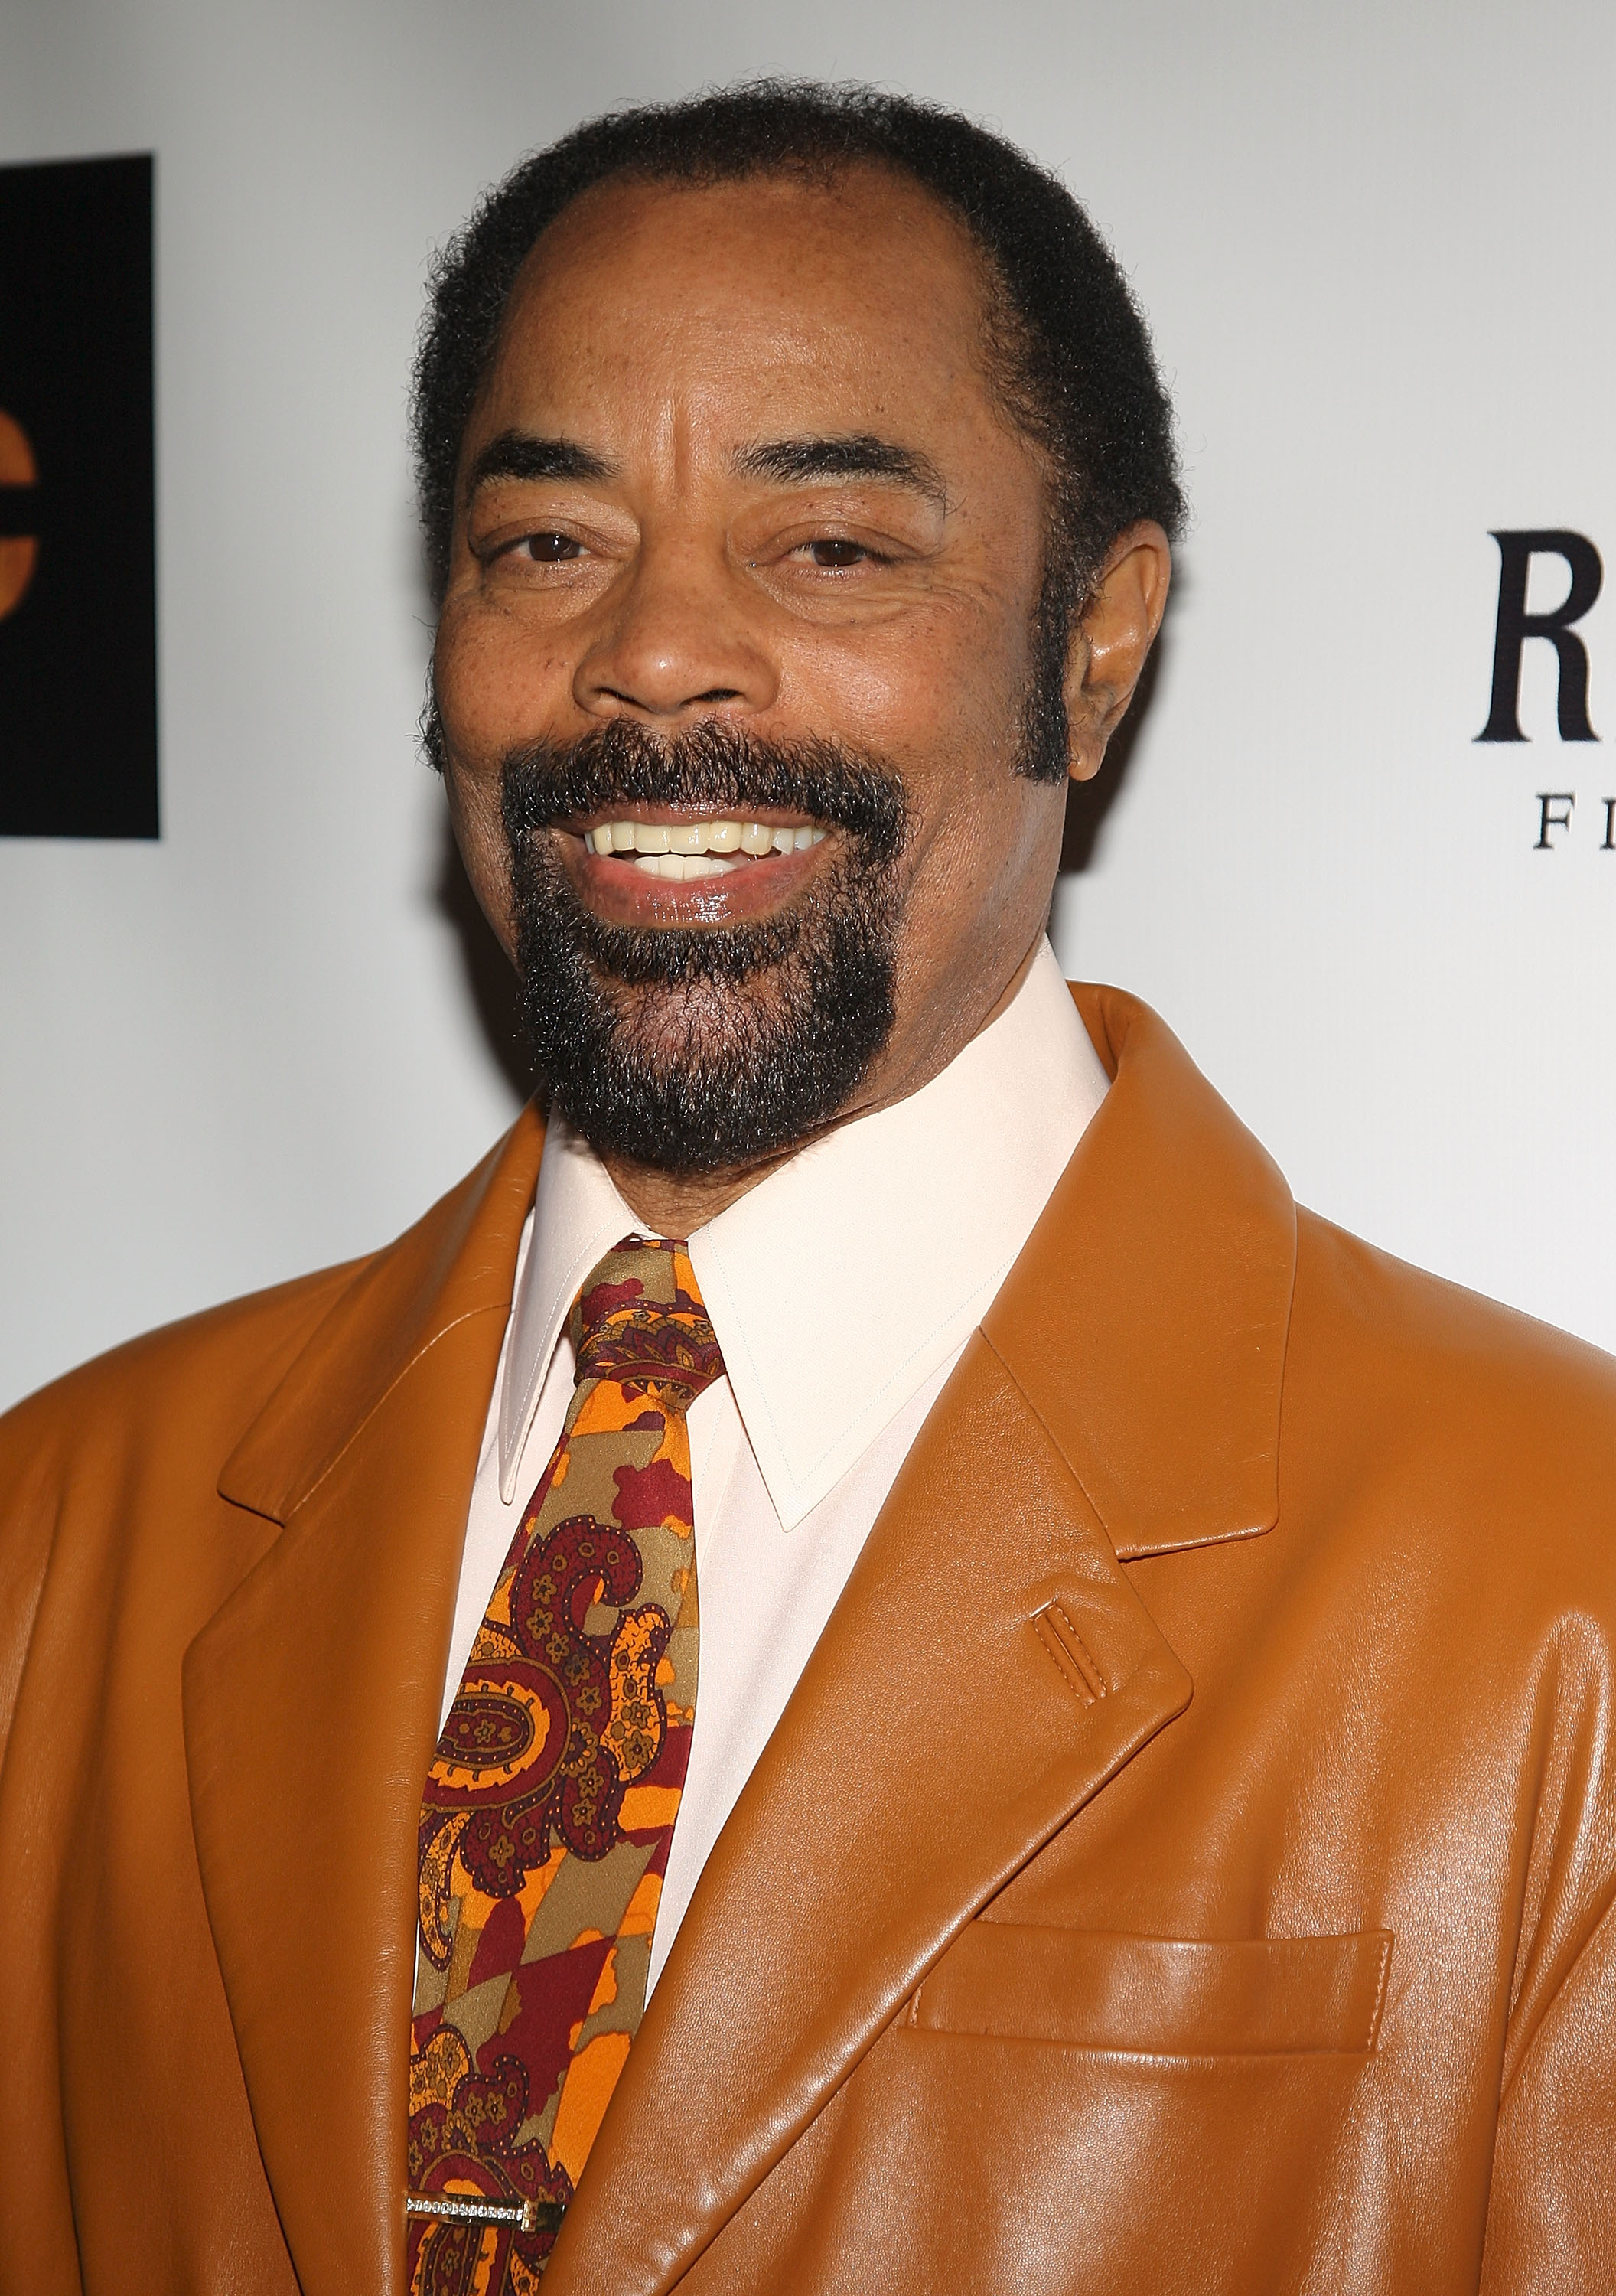 NEW YORK - FEBRUARY 25:  Former NBA player Walt Frazier attends the premiere of 'Black Magic' at The Apollo Theatre February 25, 2008 in New York City.  (Photo by Stephen Lovekin/Getty Images)